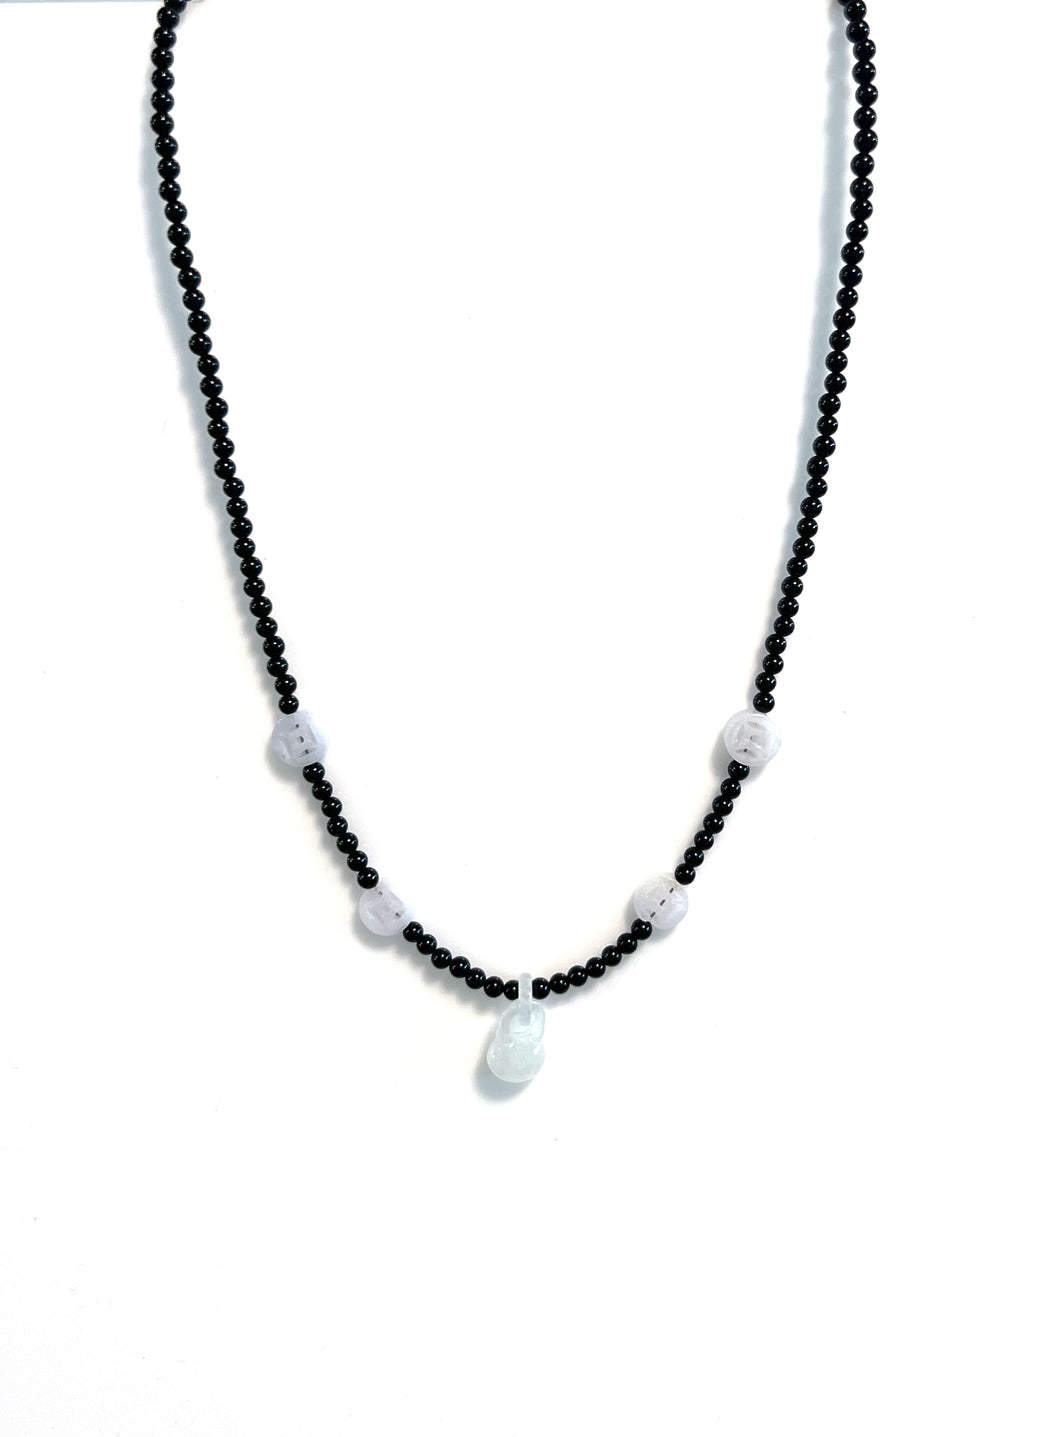 Australian Handmade Black Necklace with Polished Black Onyx White Carved Jade Beads and Sterling Silver